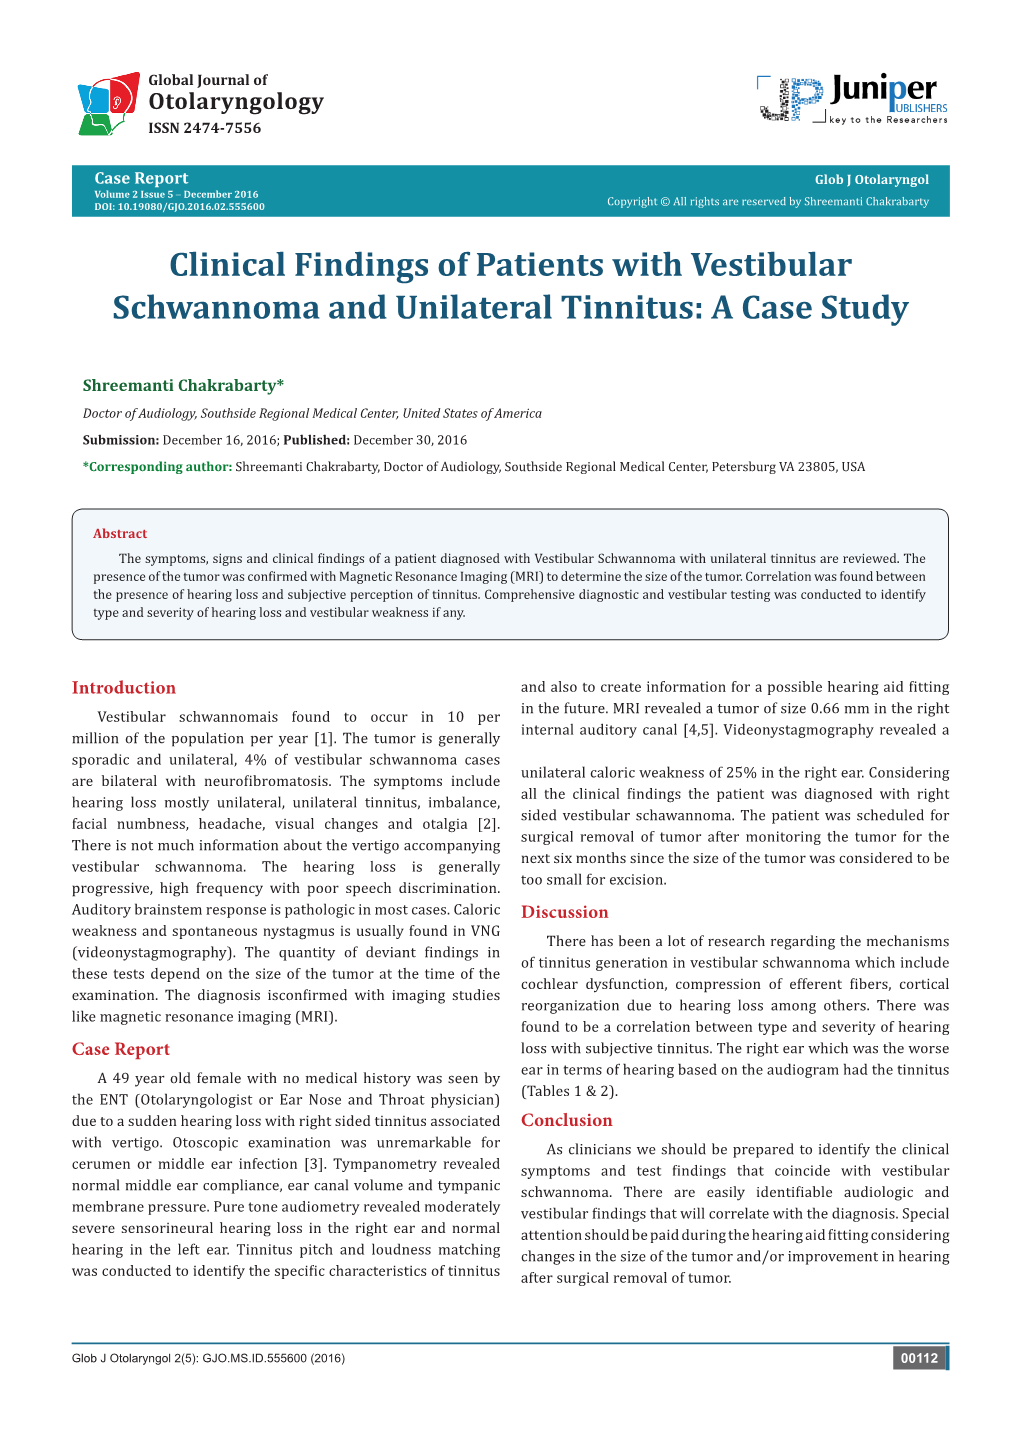 Clinical Findings of Patients with Vestibular Schwannoma and Unilateral Tinnitus: a Case Study